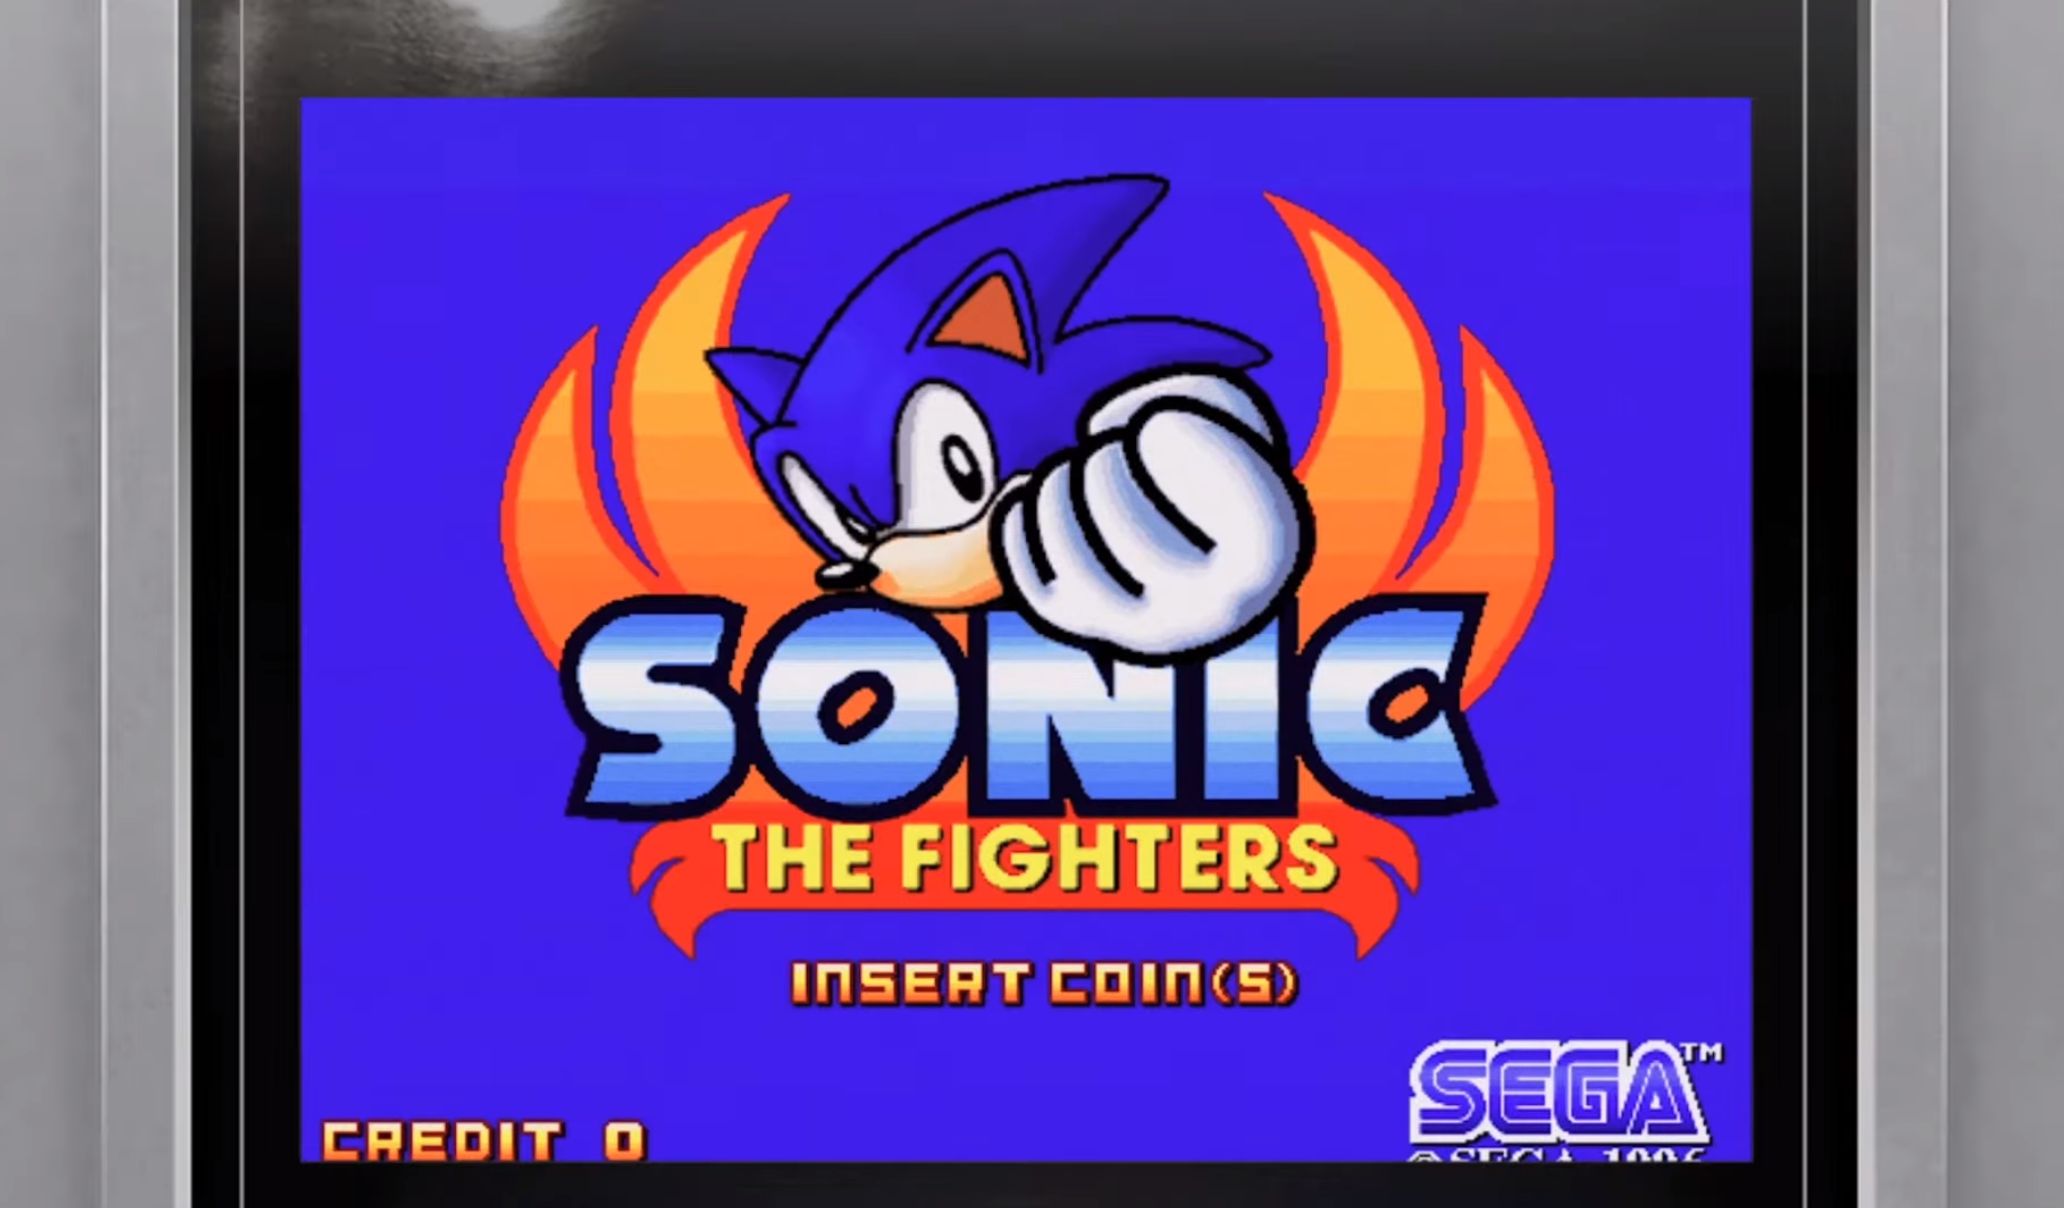 Image for You'll be able to play Sonic the Fighters in Lost Judgment